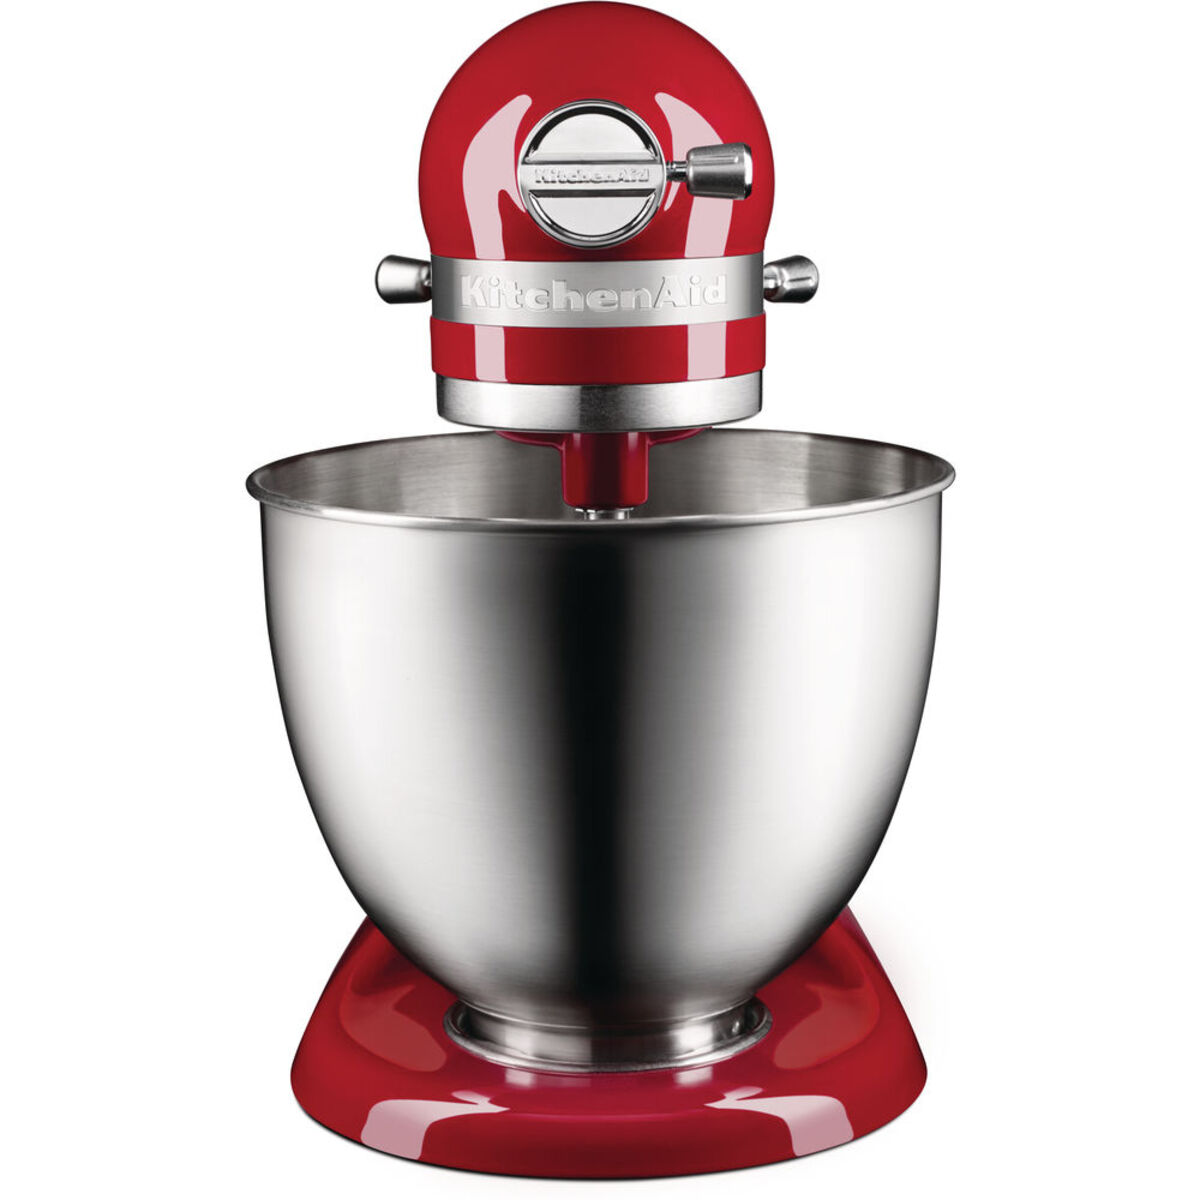 KitchenAid 3.3 Litre 5KSM3311XBER Stand Mixer with 3.3 Litre Bowl - Empire Red